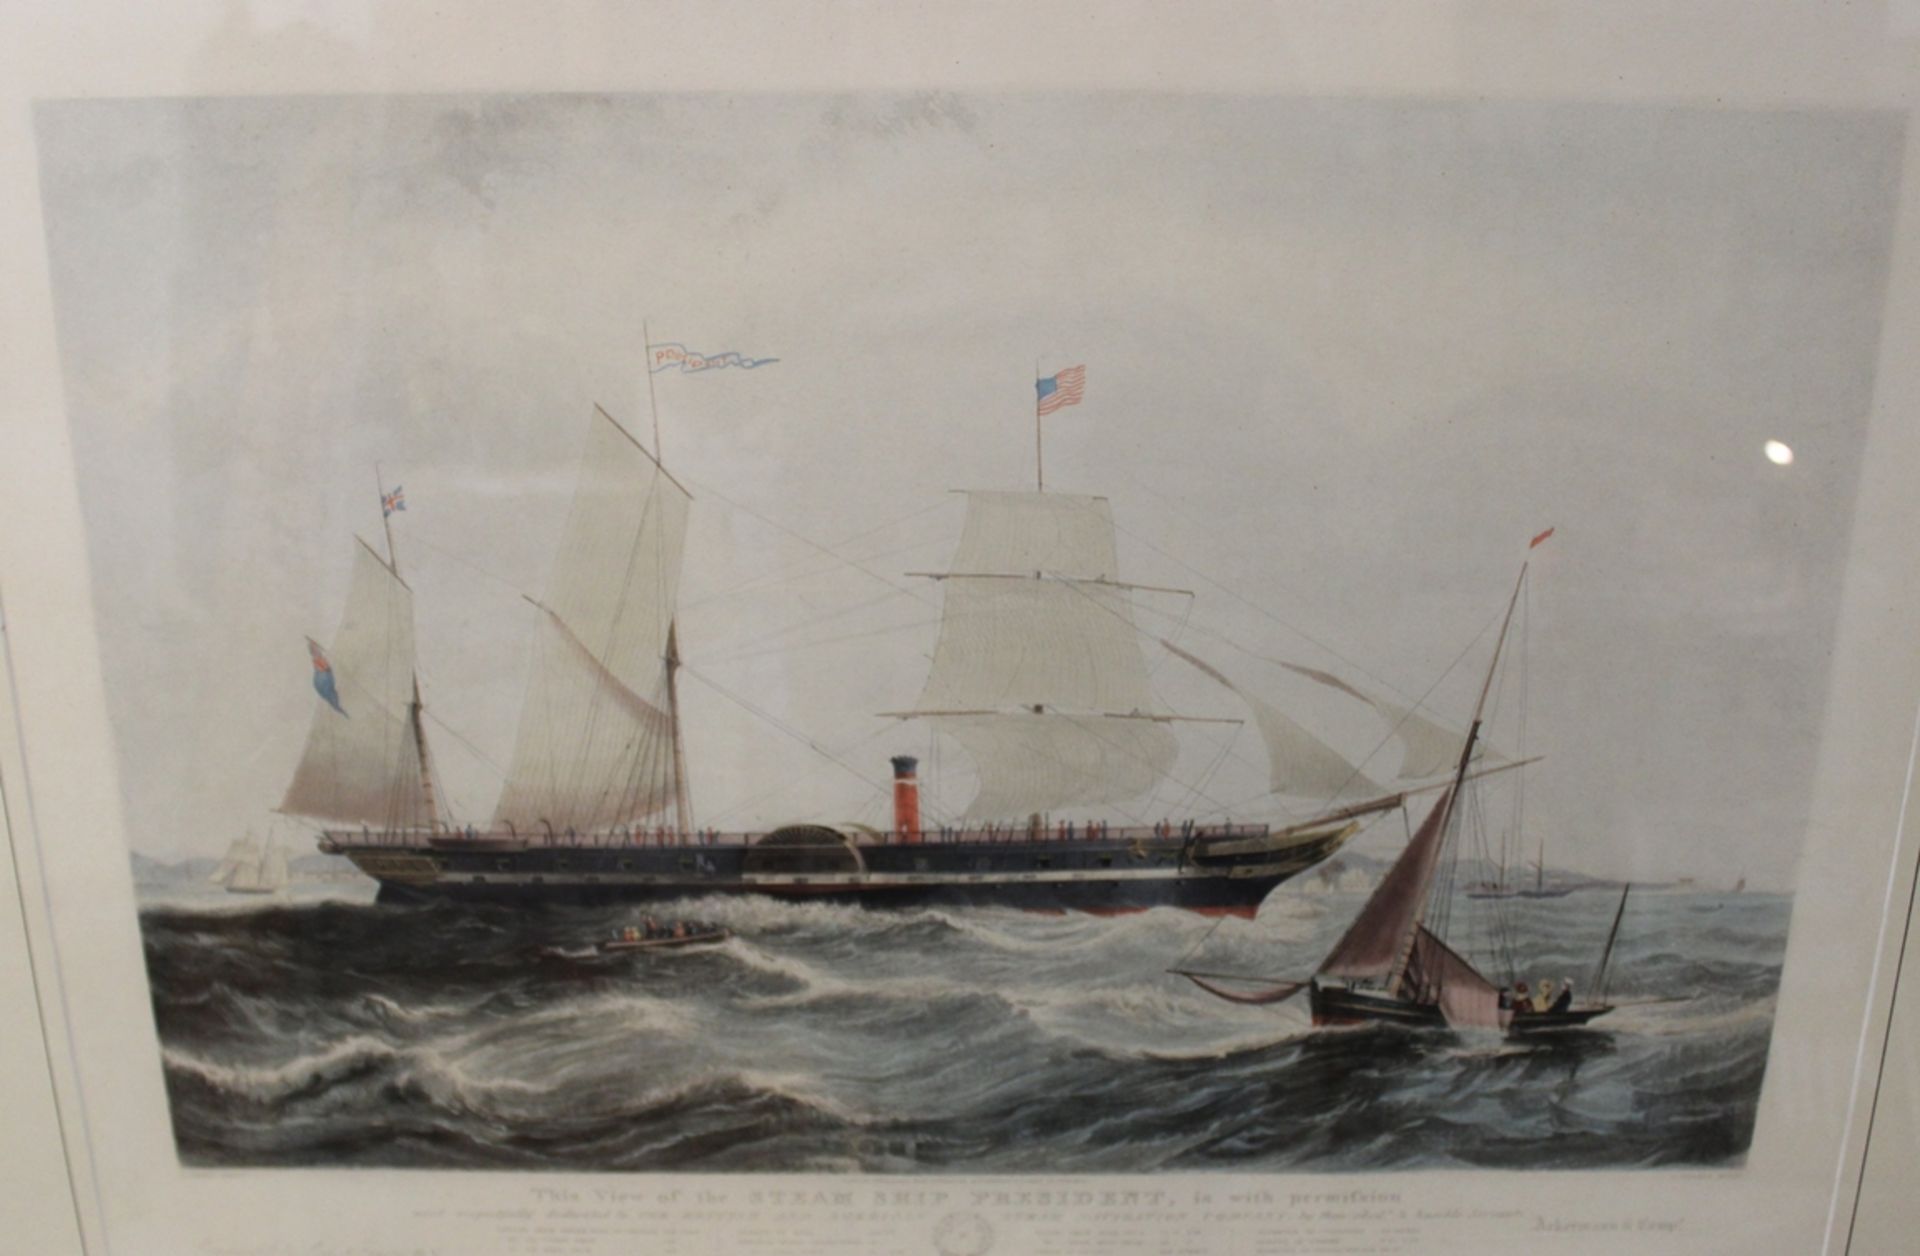 Henry A. PAPPRILL (c.1816-1903), View of the Steamship President, hrsg. Ackermann 1840, gerahmt/Gla